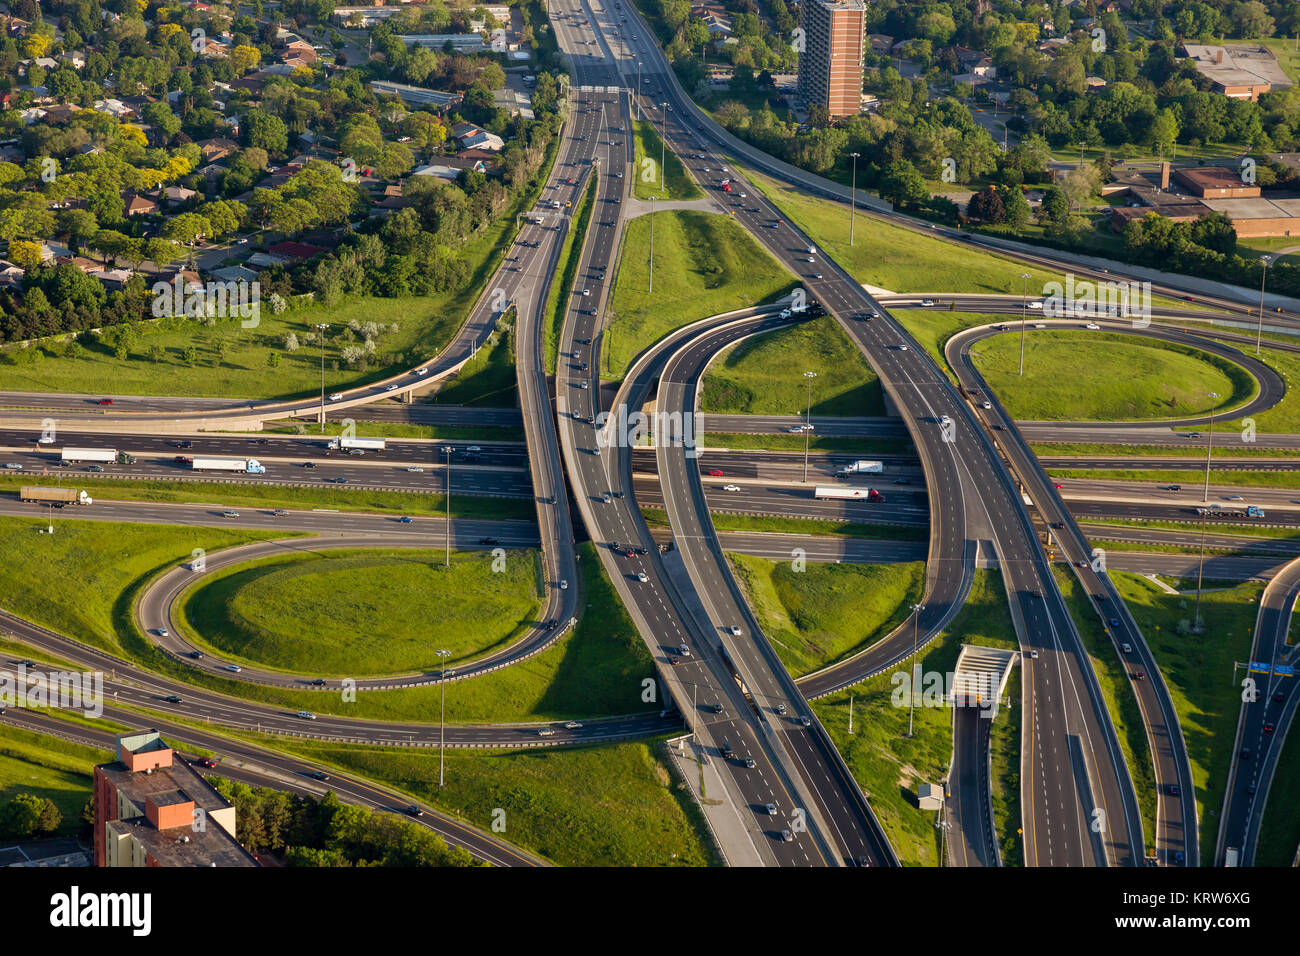 An aerial view of a highway interchange in Toronto Stock Photo - Alamy